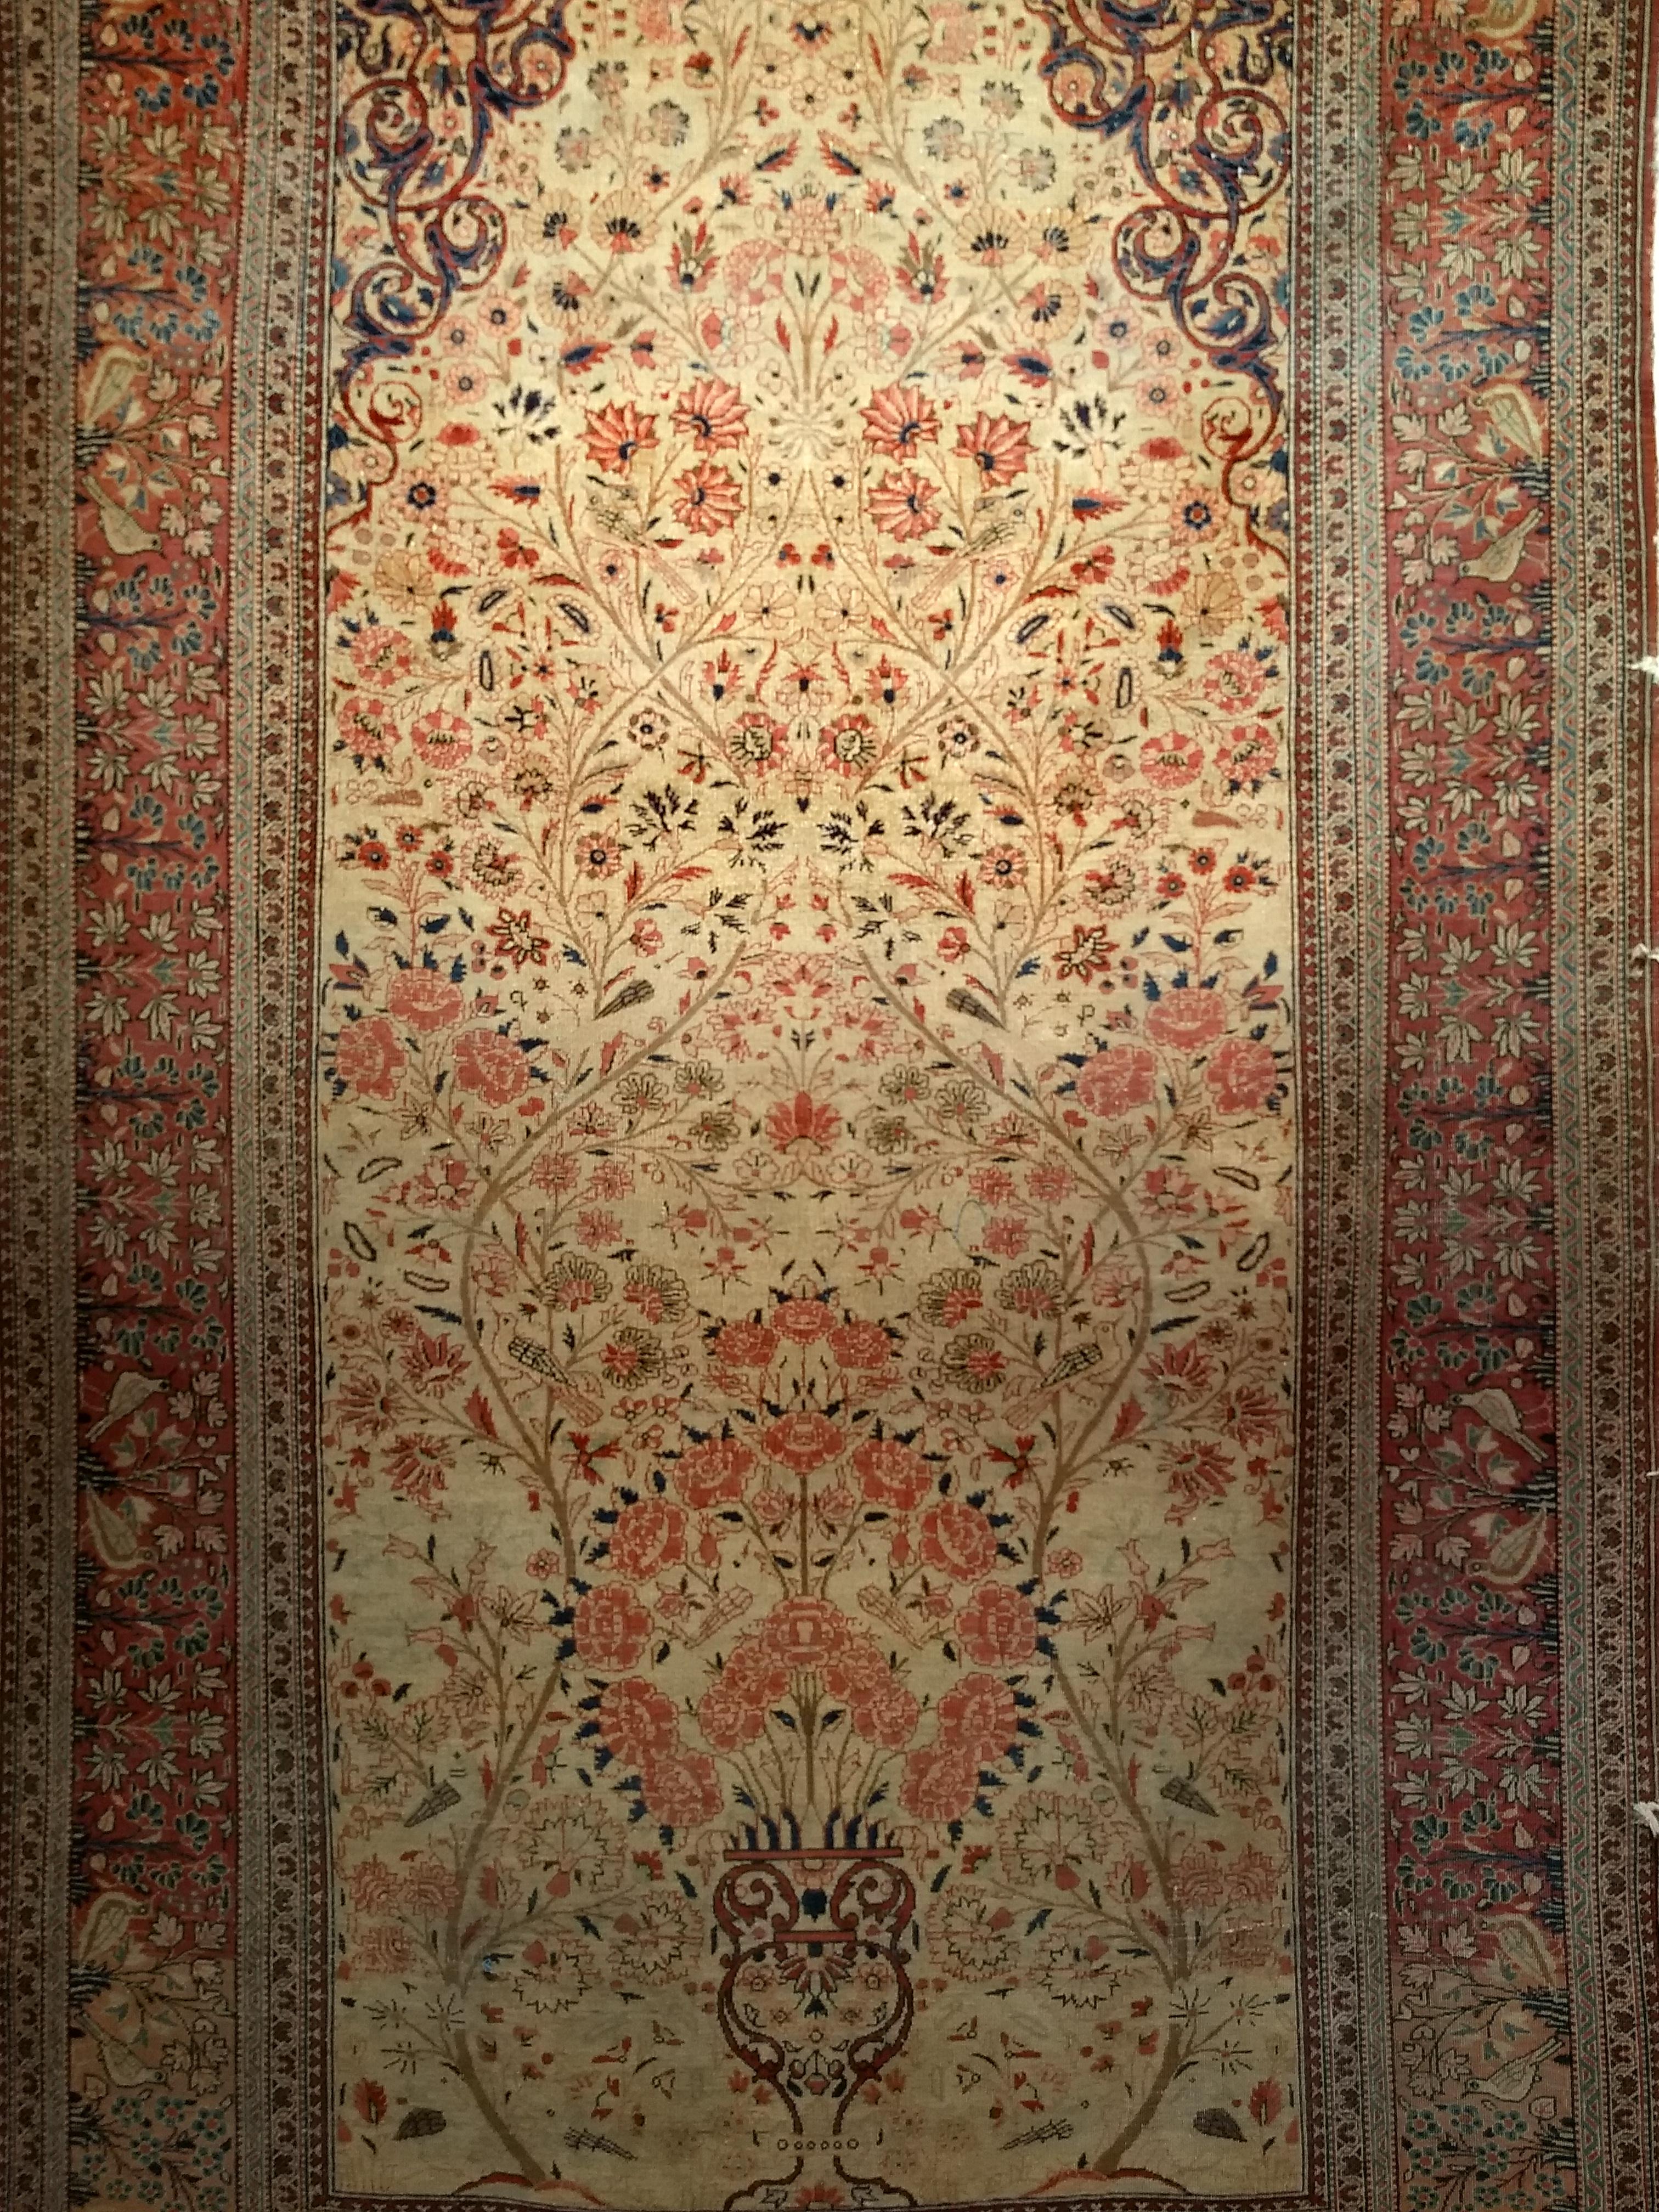 Vegetable Dyed 19th Century Persian Kashan Vase “Tree of Life” Rug in Ivory, Brick Red, Navy For Sale